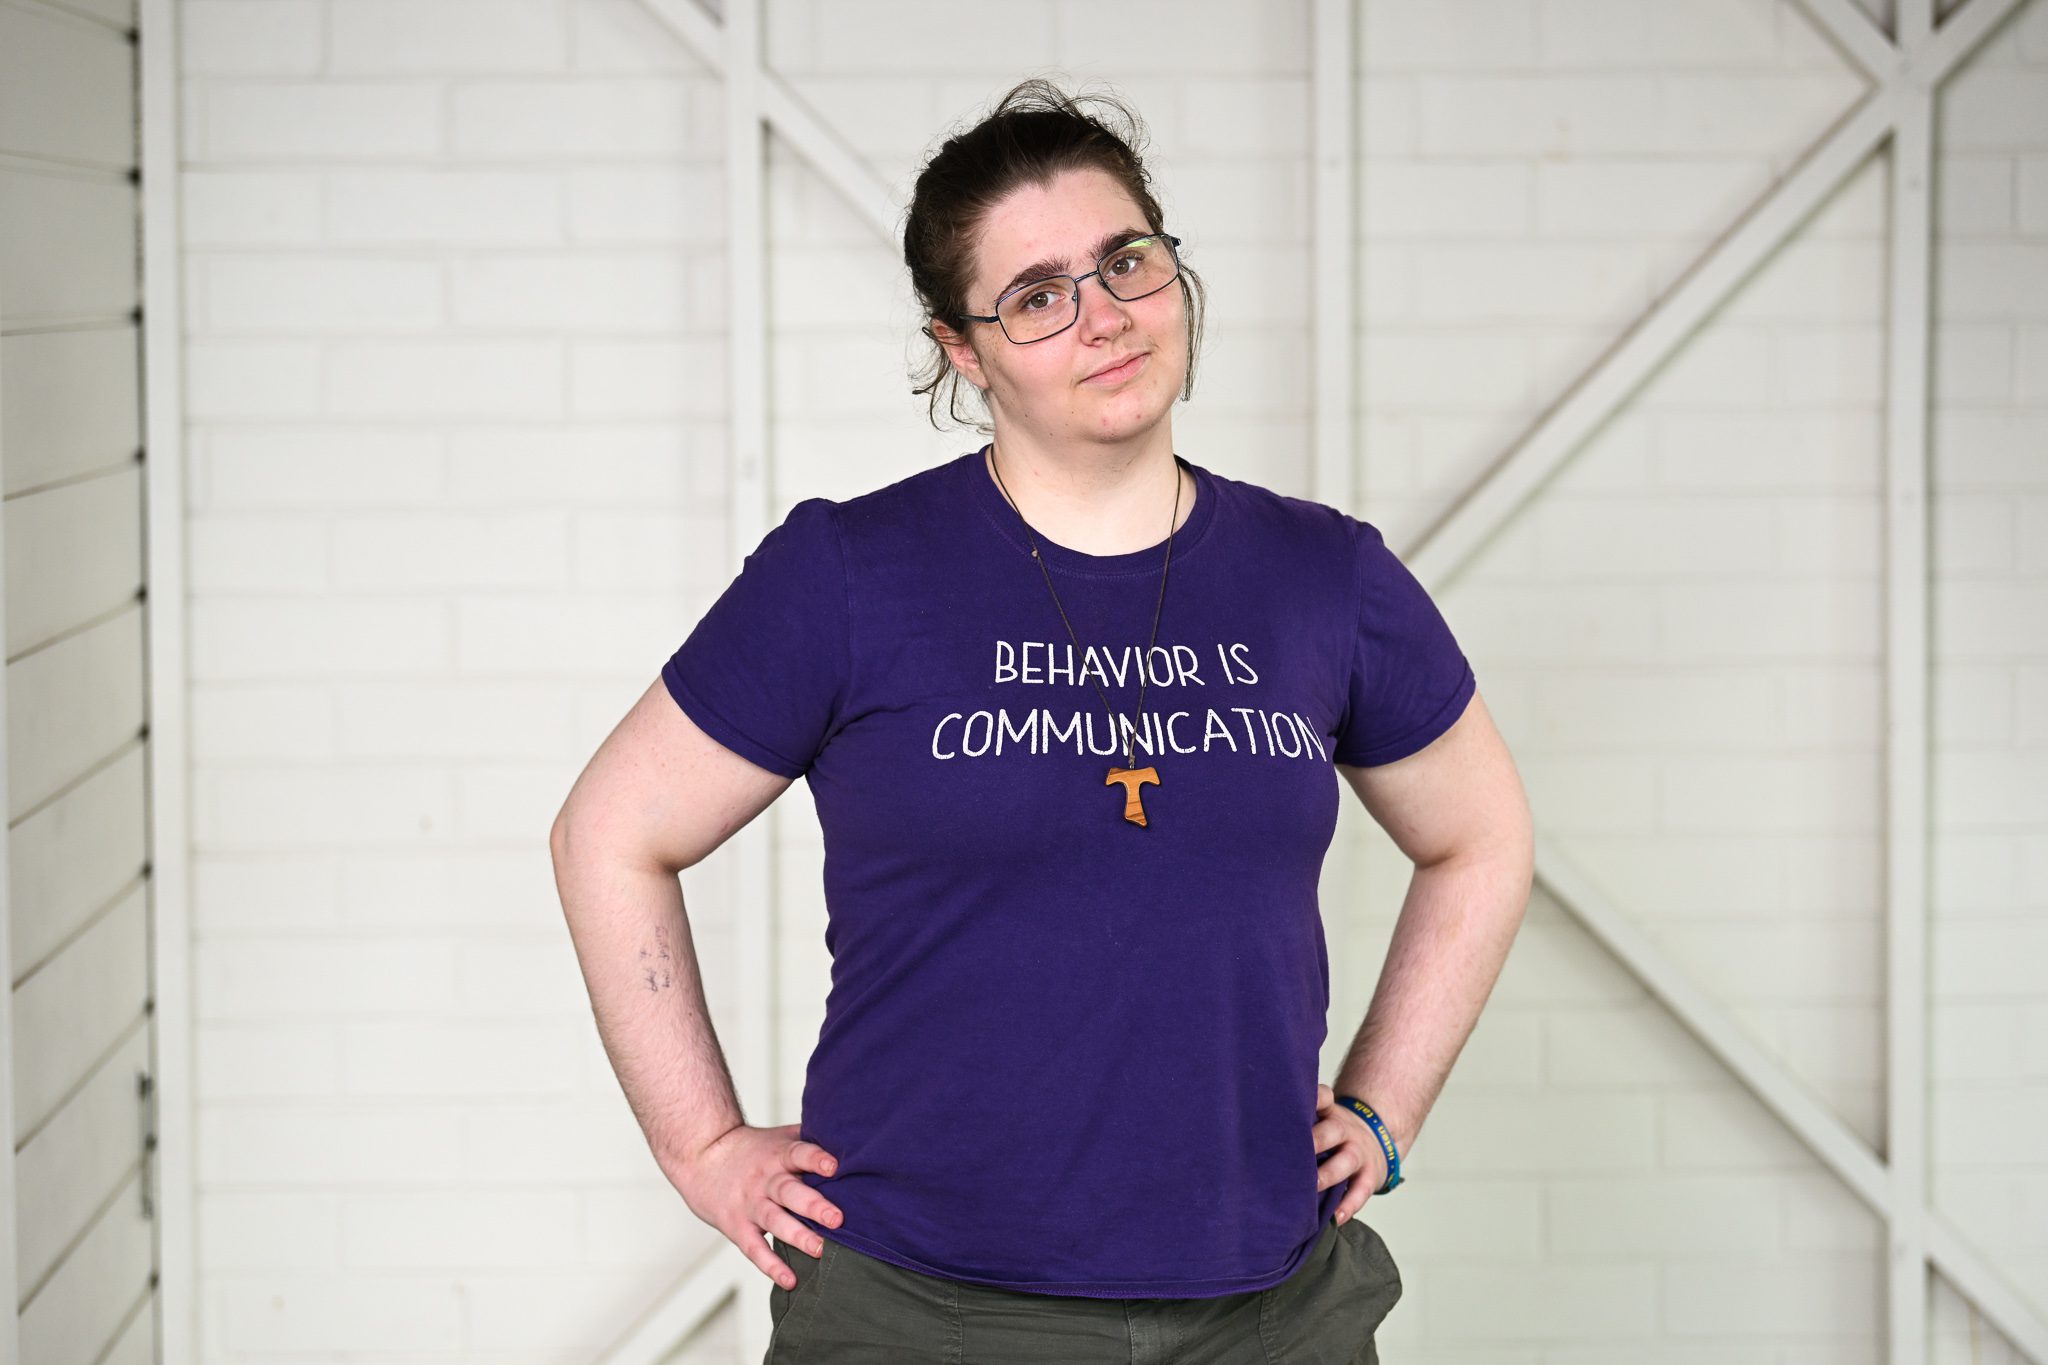 A girl with brown hair and glasses, wearing a purple tshirt, she has her hands on her hips and smiling at the camera.